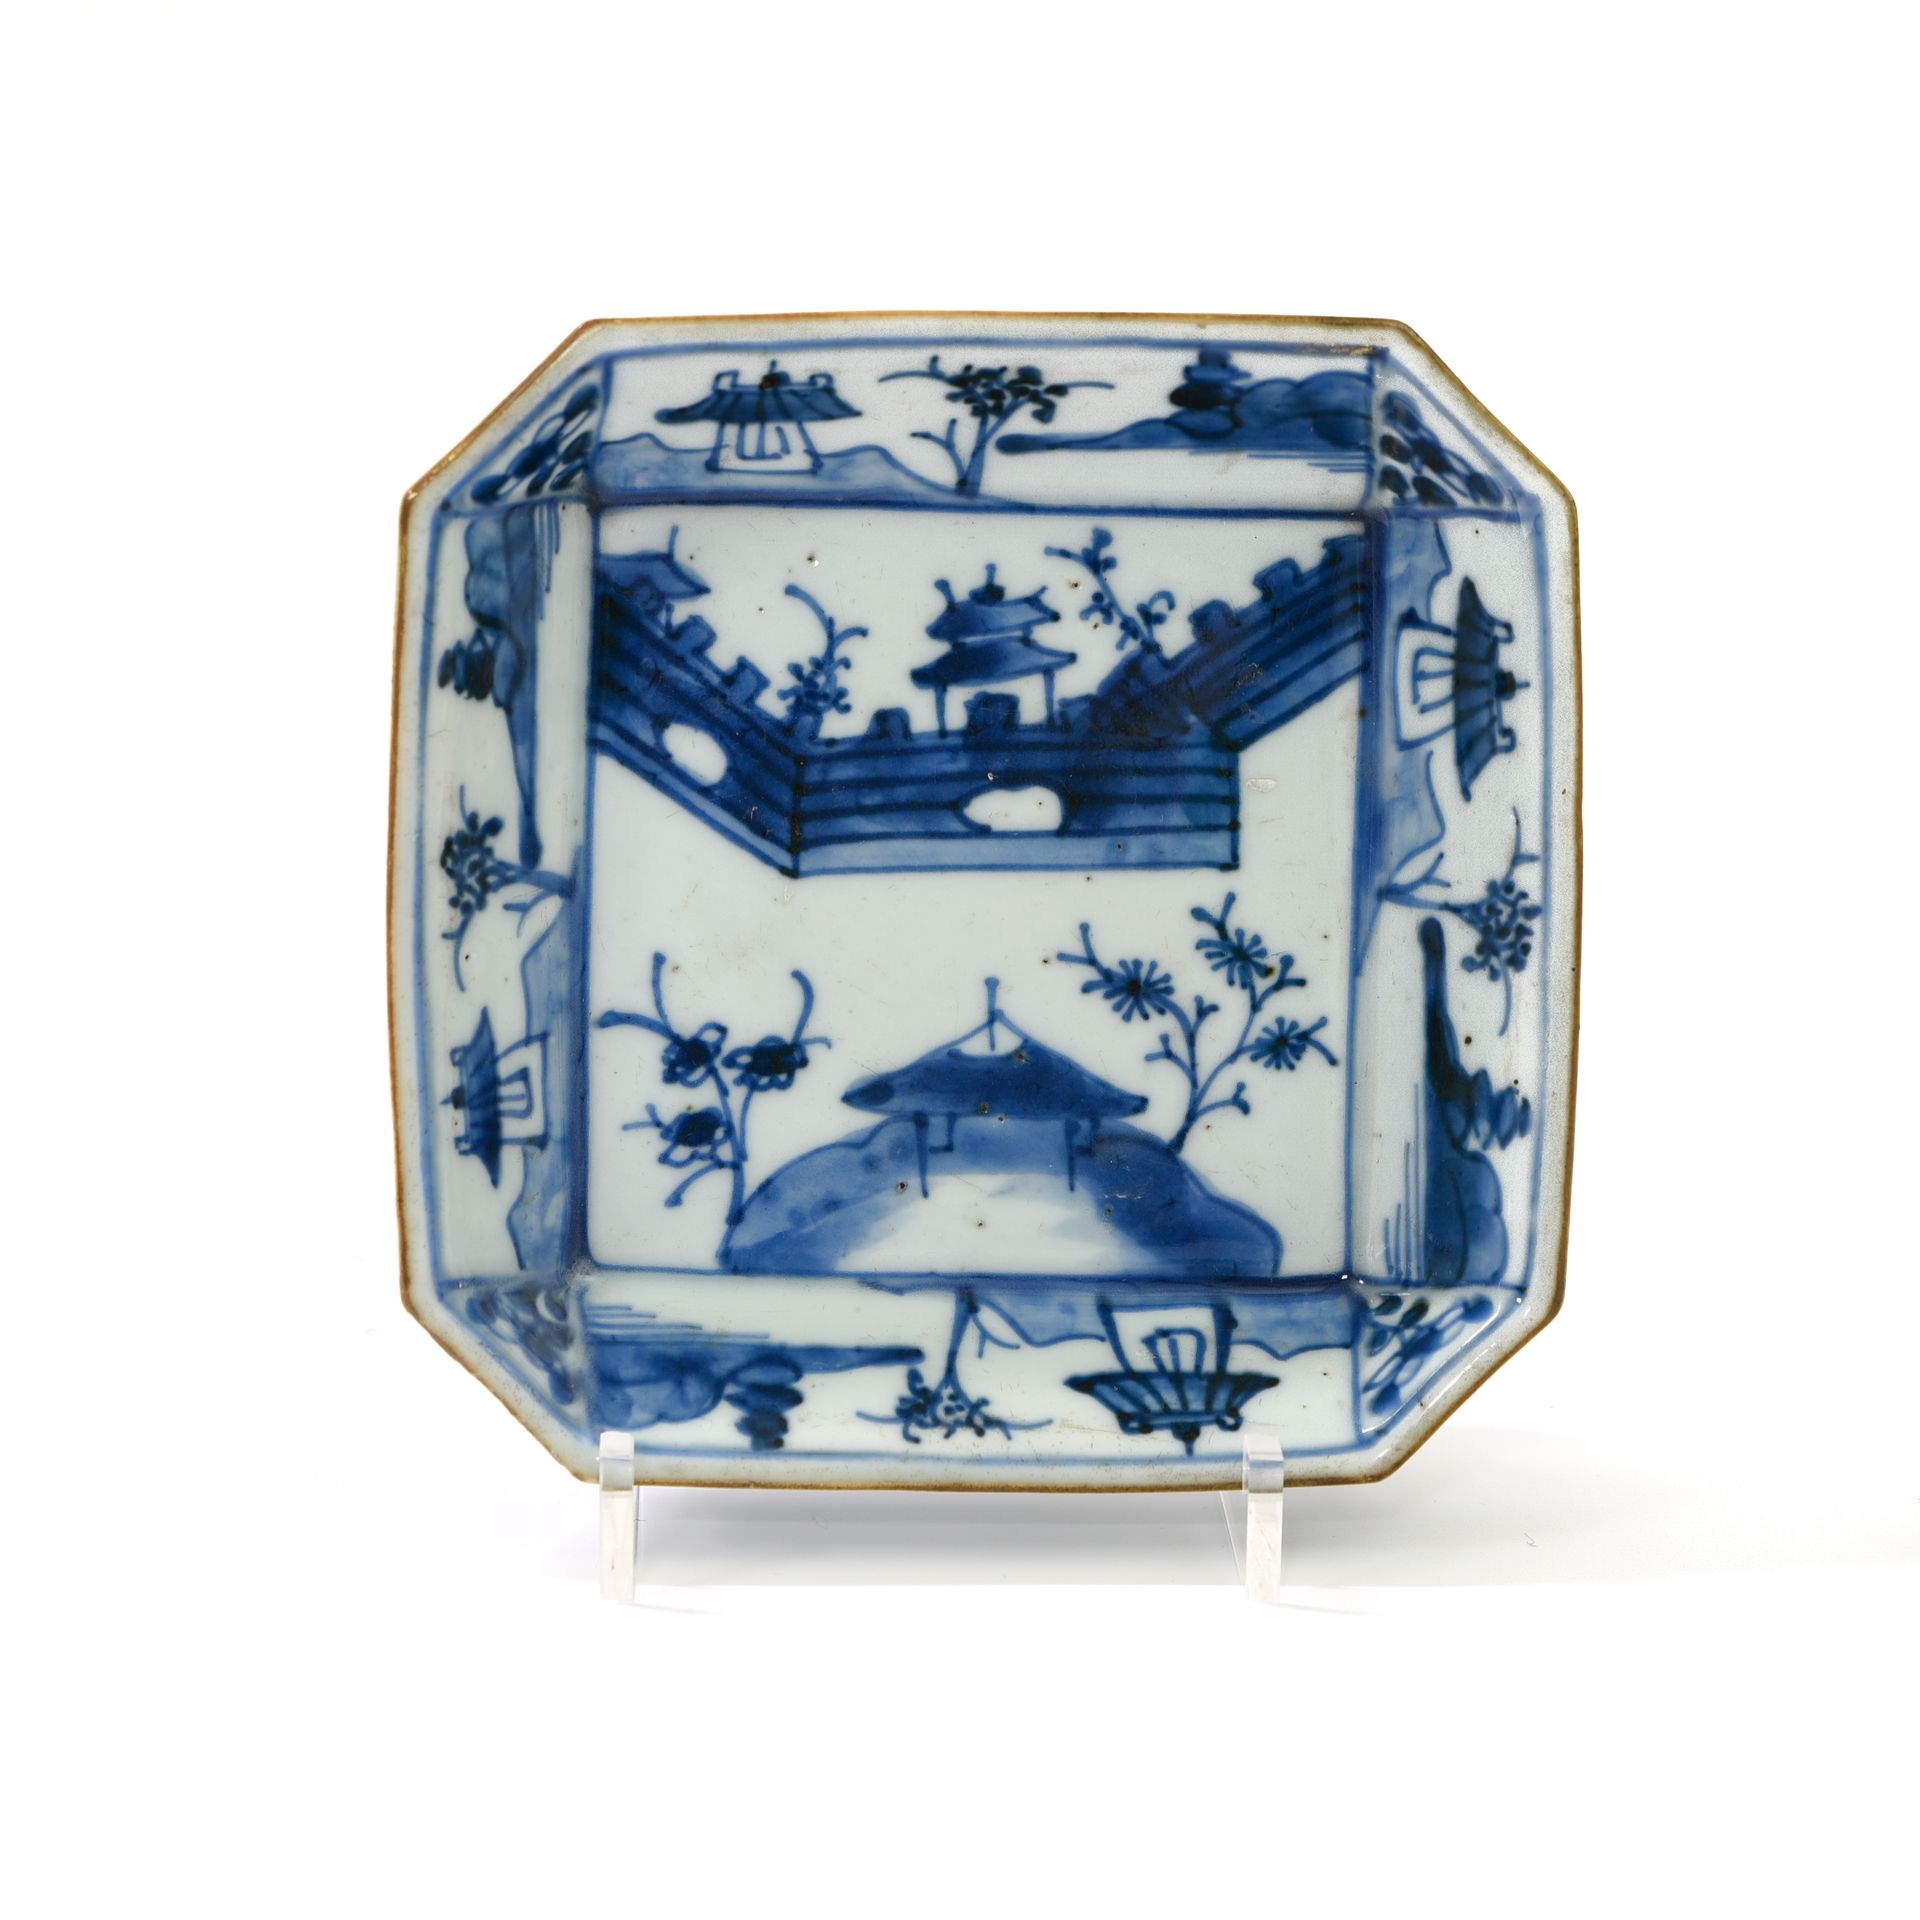 Null Small platter

CHINA, INDIA COMPANY - QIANLONG ERA (1736-1795)

Square with&hellip;